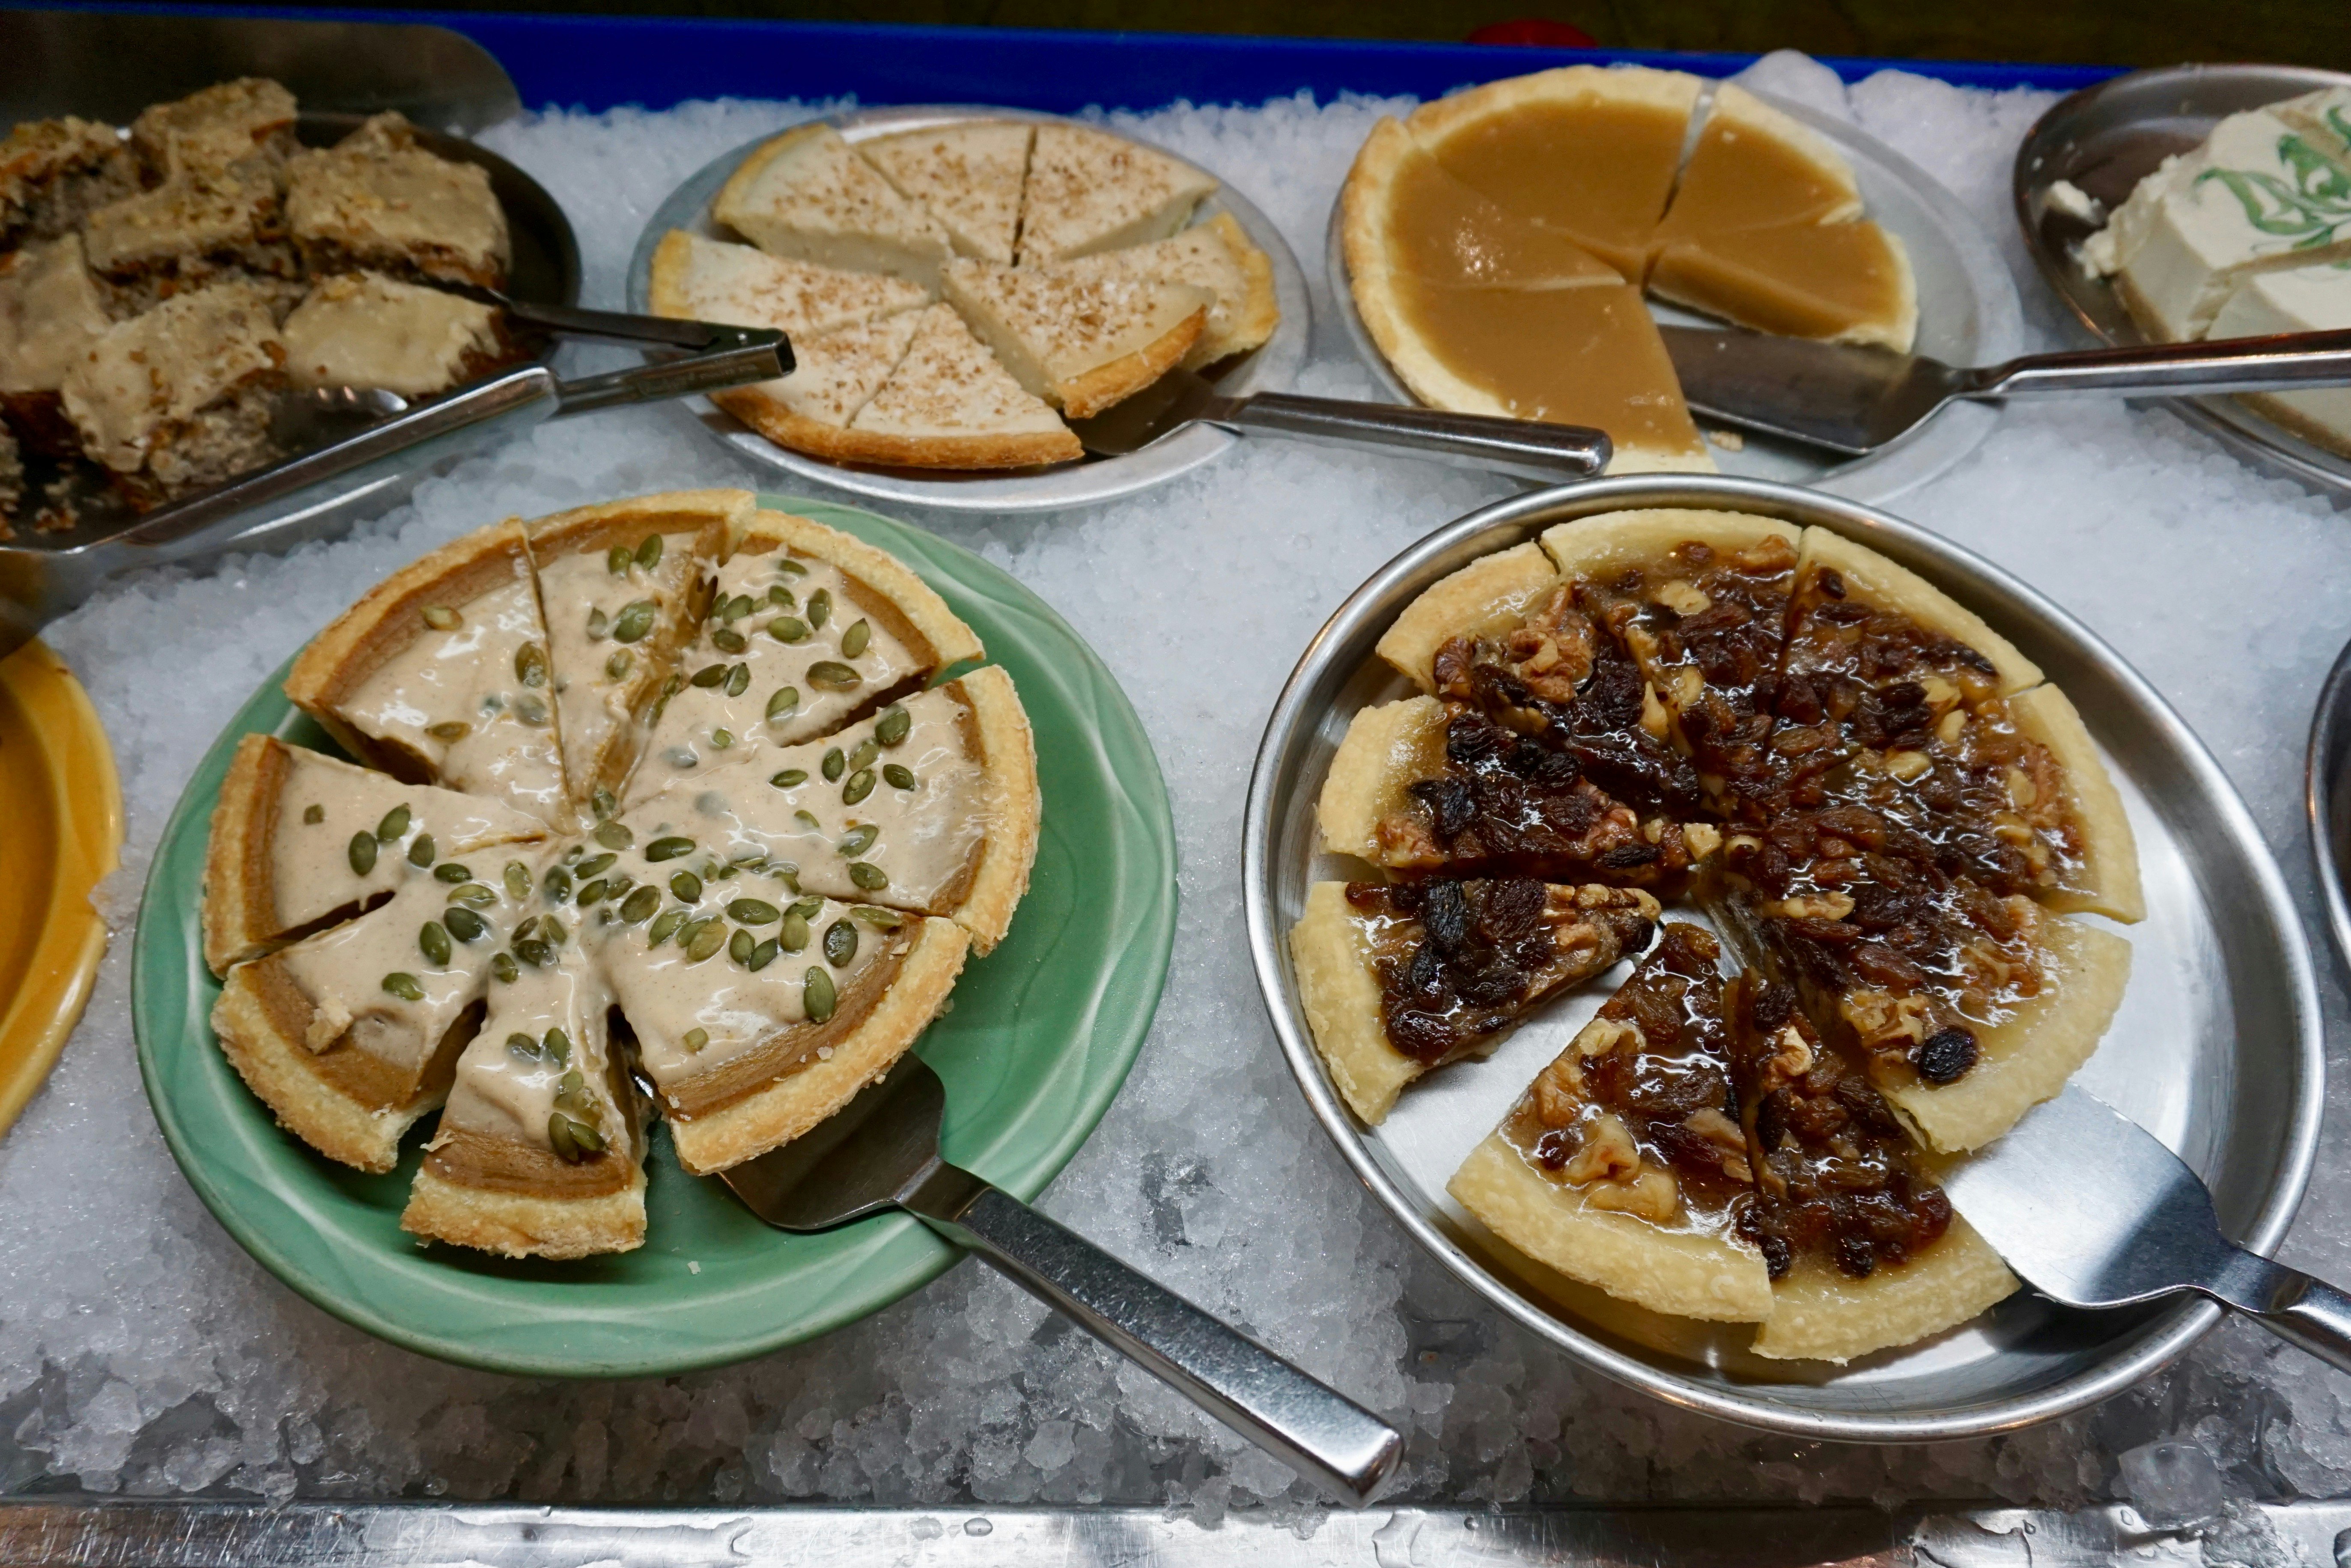 An arrangement of desserts such as pecan pie are sitting on stainless steel platters on a bed of crushed ice.